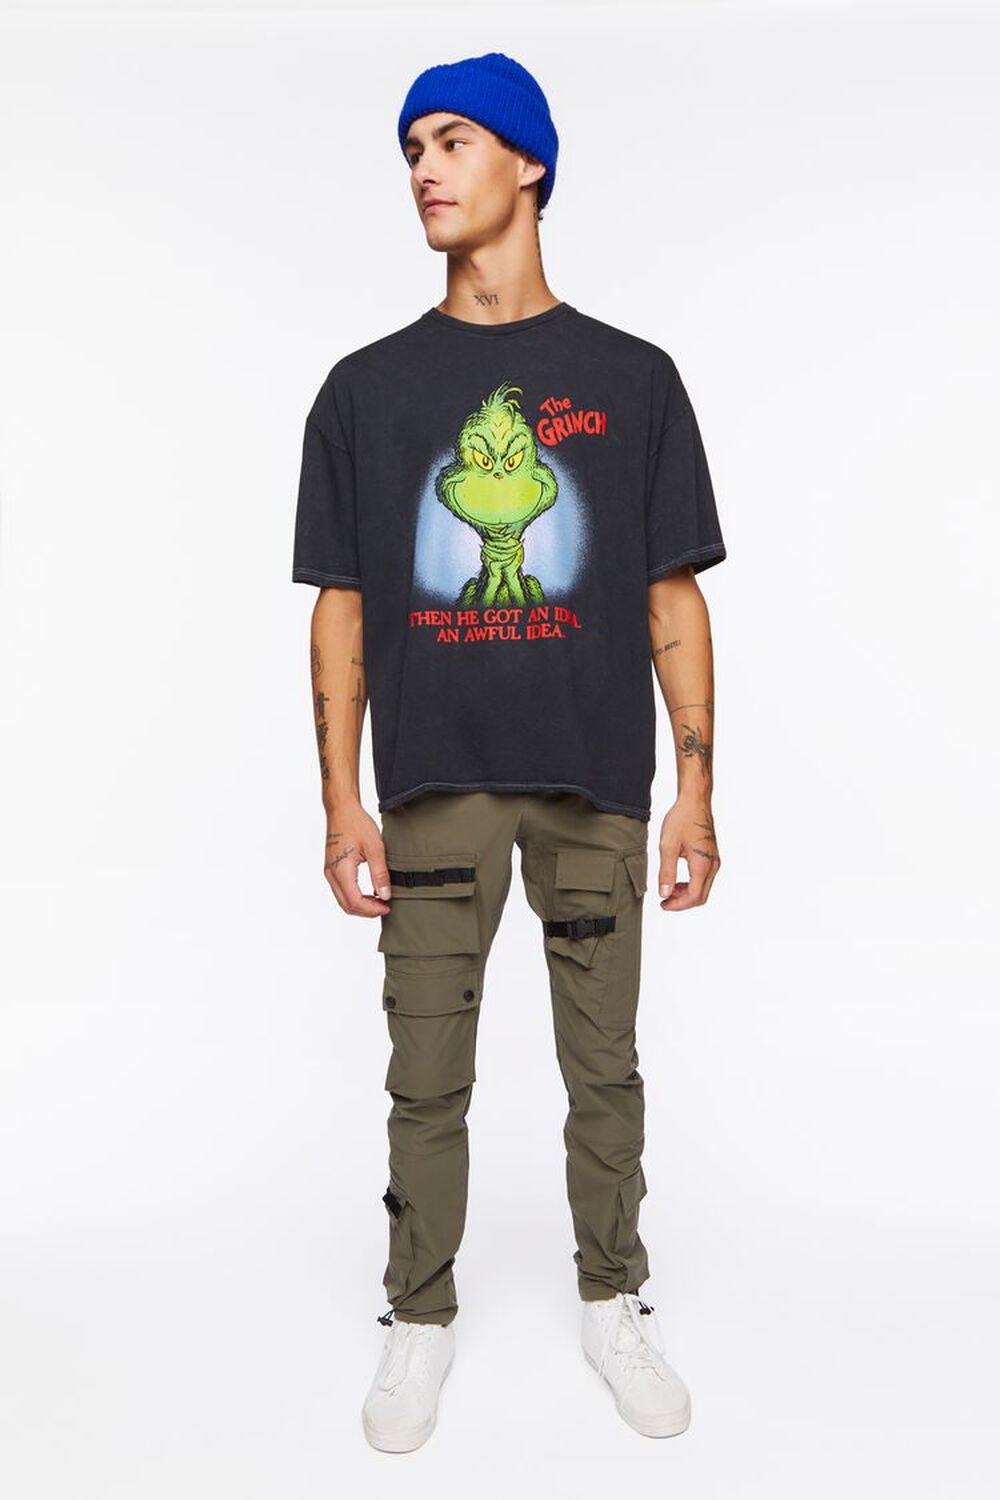 The Grinch Graphic Tee